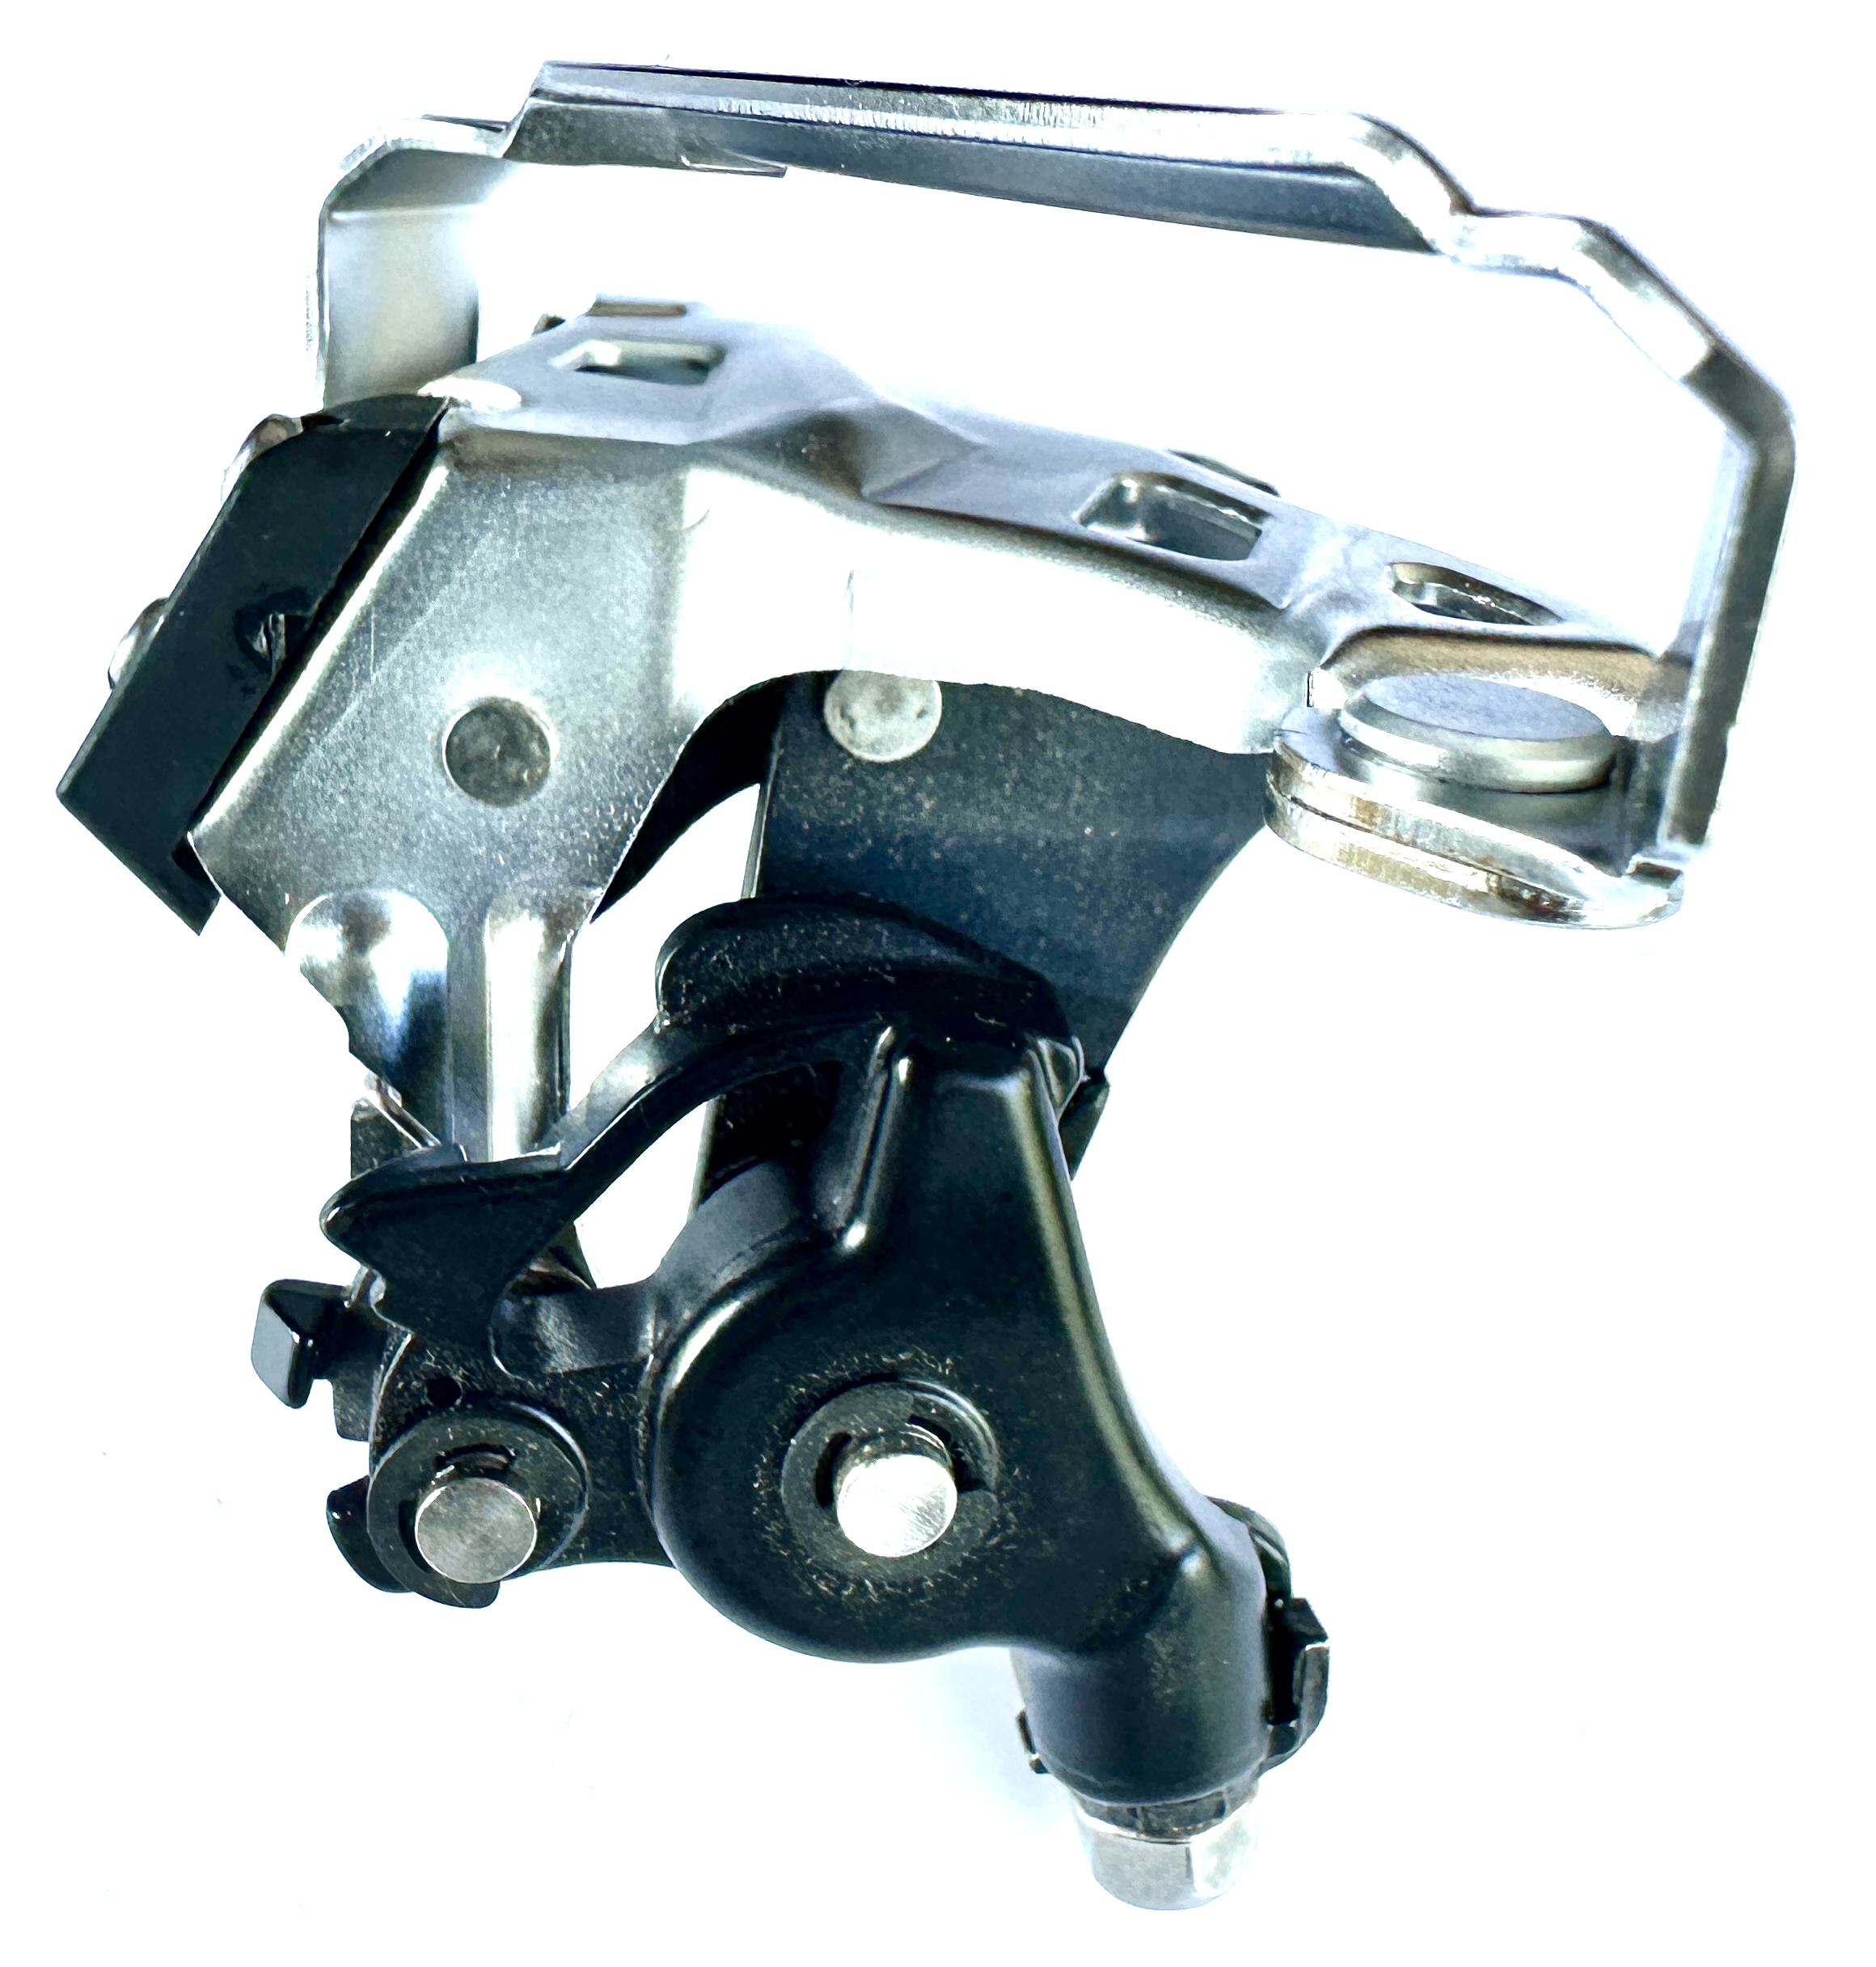 DEORE SLX front derailleur from Shimano